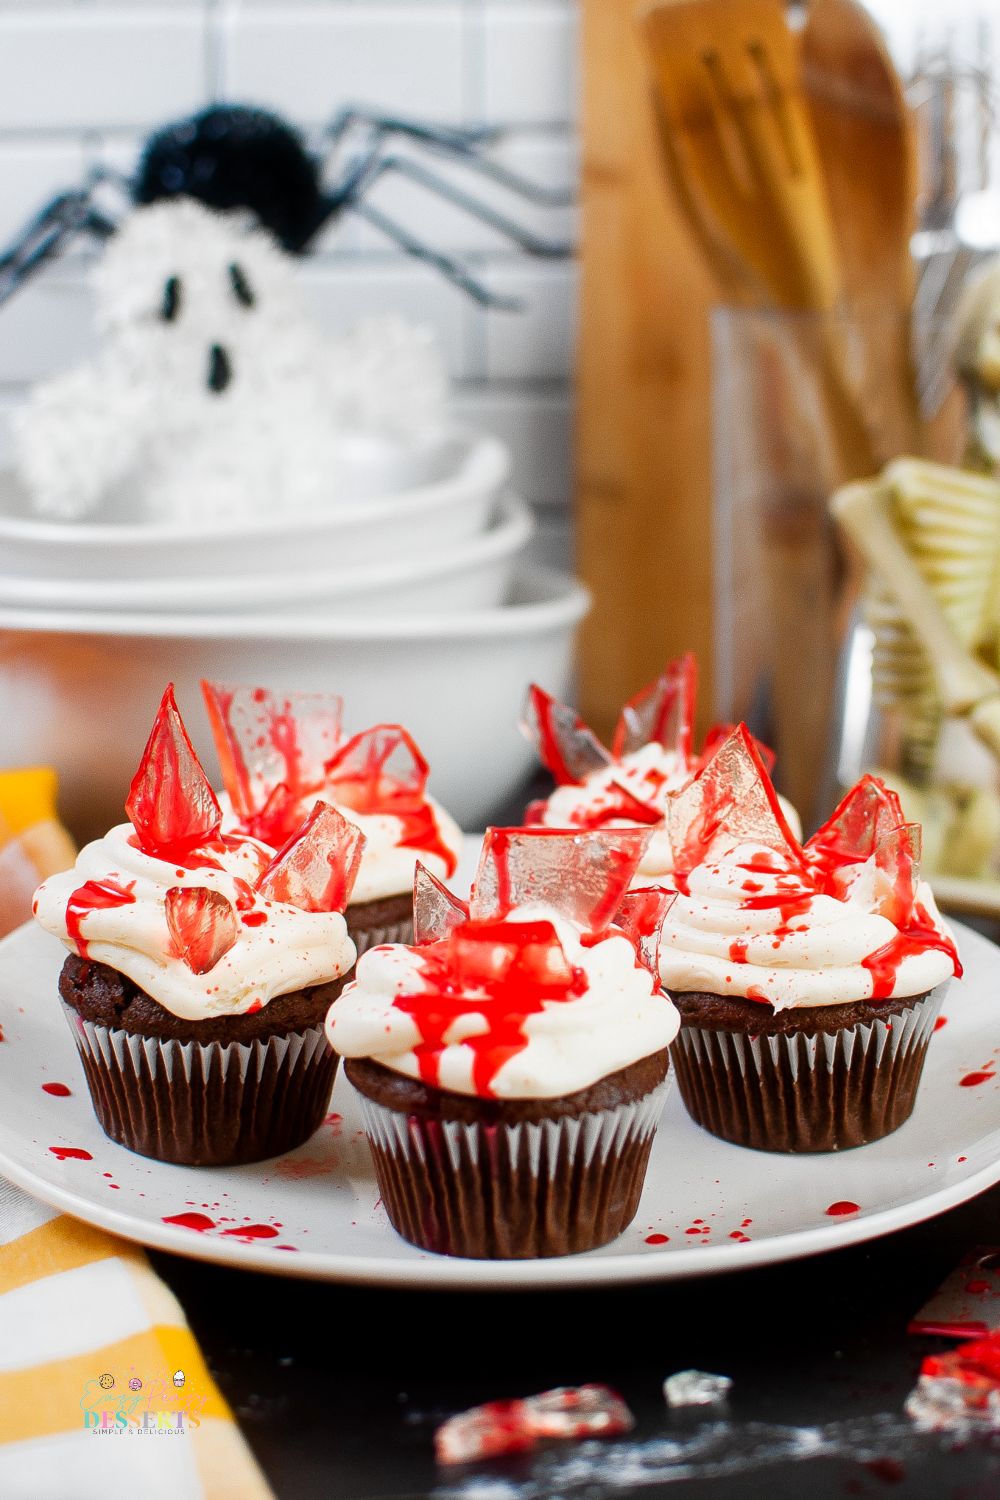 Close up image of bloody Halloween cupcakes on a serving plate